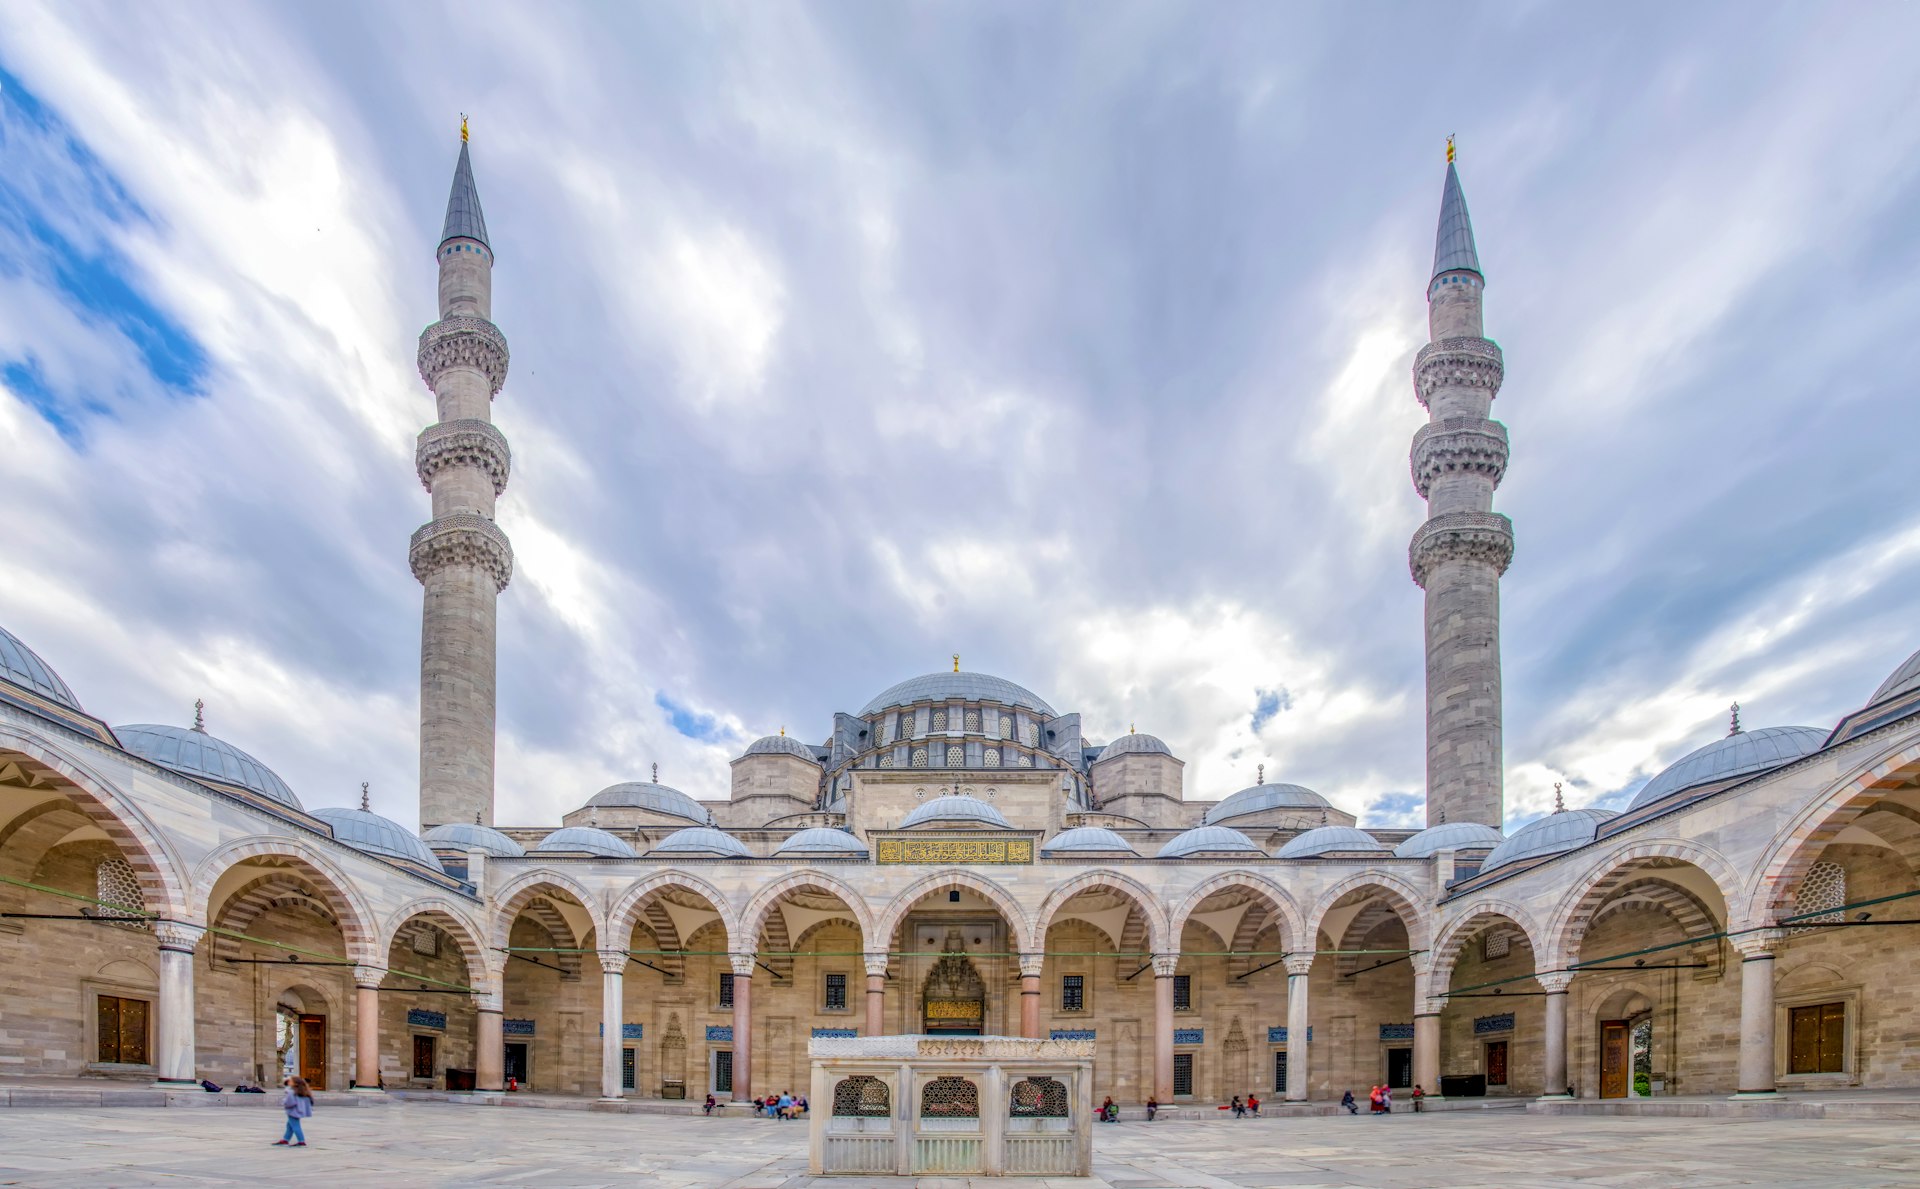 A wide view of people walking past the Suleymaniye Mosque on the Third Hill of Istanbul